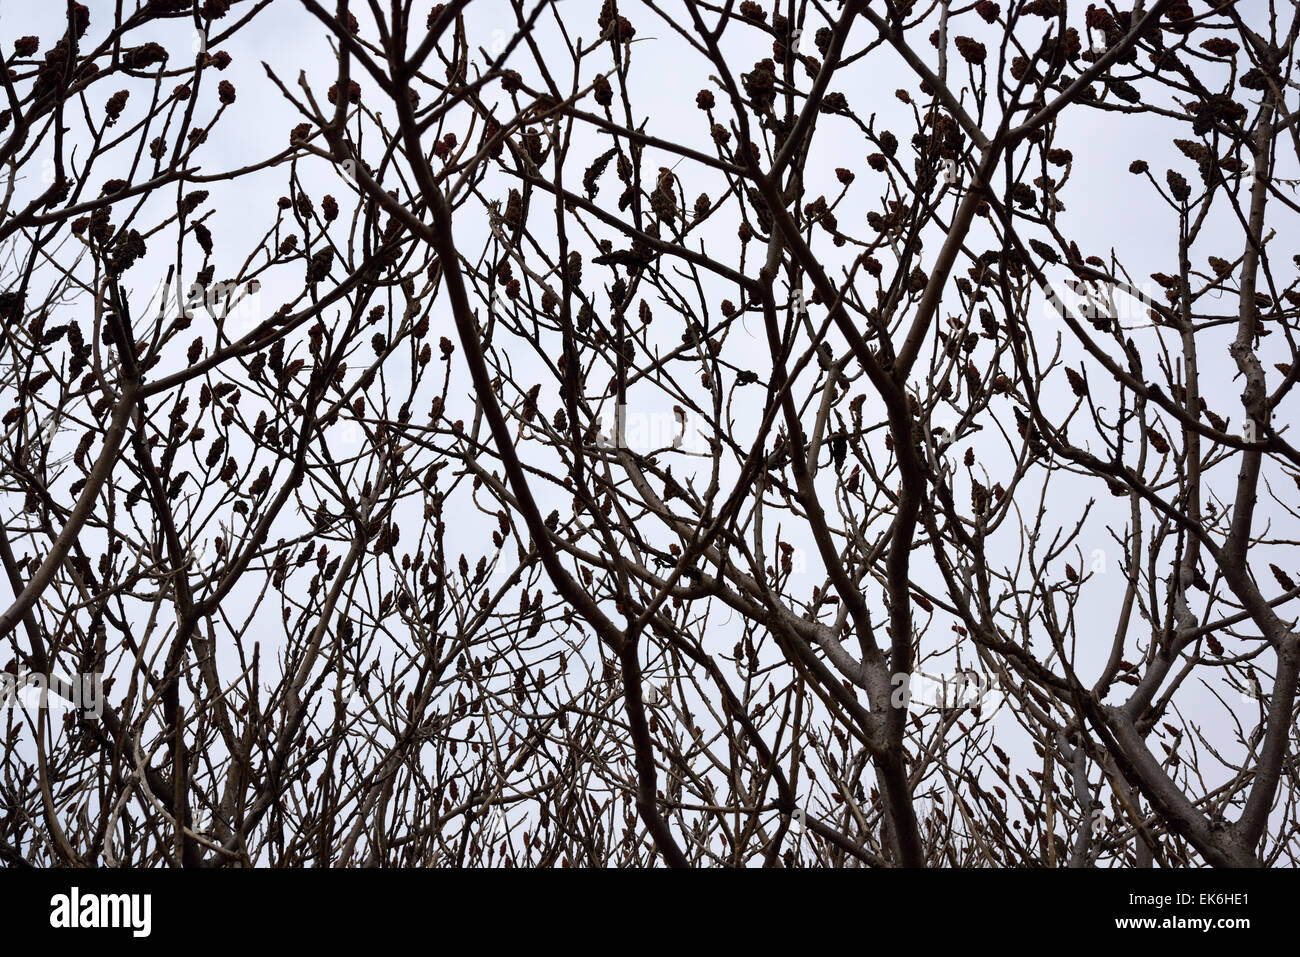 Barren branches of a stand of Staghorn Sumac bush in spring with gray sky Stock Photo